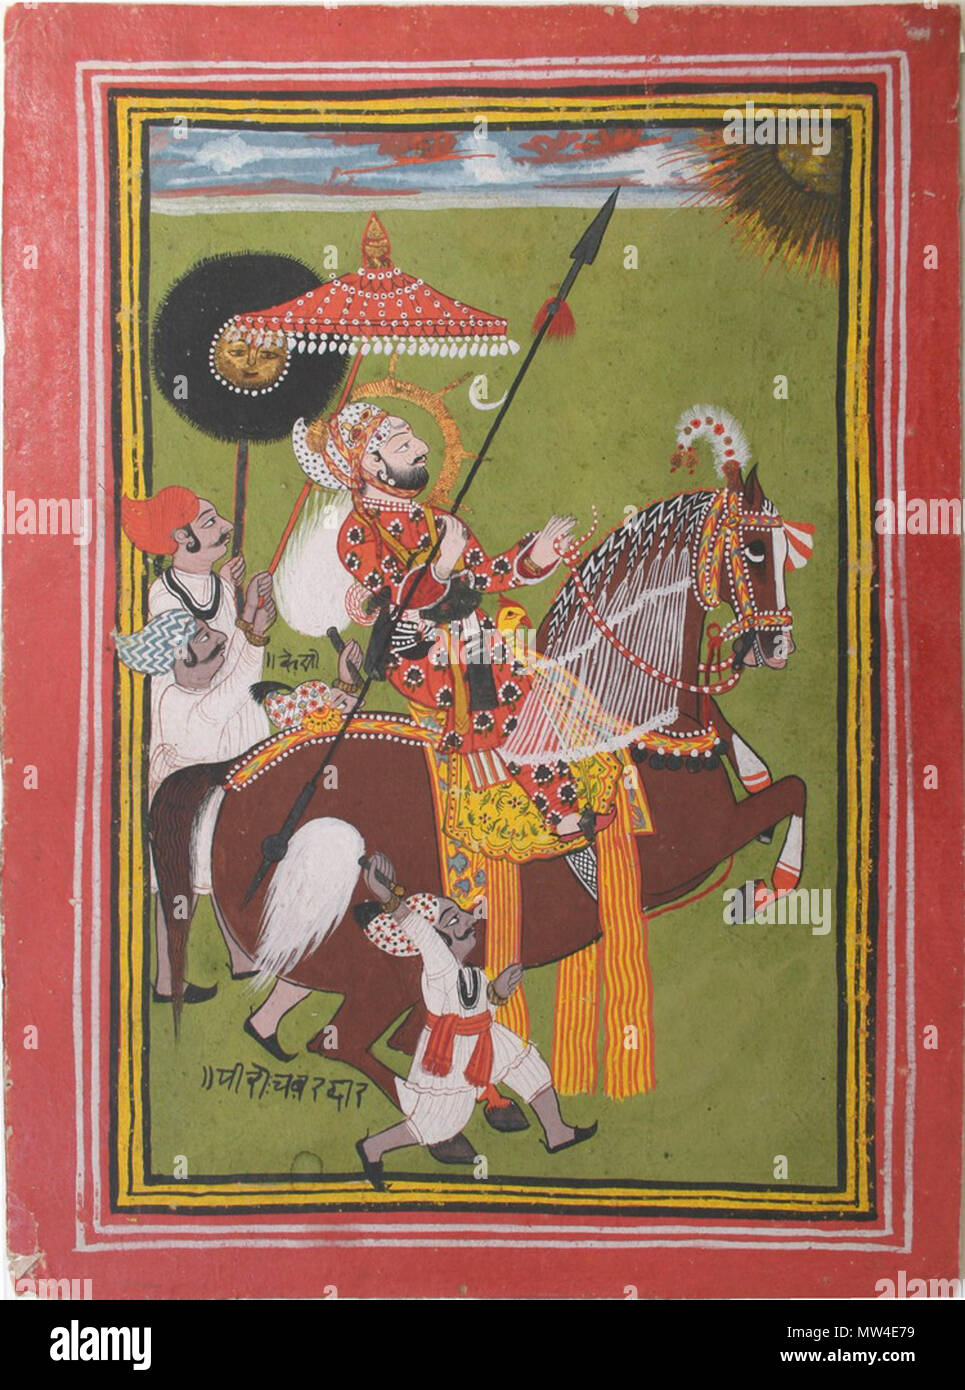 . Posthumous equestrian portrait of Maharana Ari Singh (r. 1761-73). Mewar, circa 1820-40. Opaque watercolour with gold on wasli. 30.4 x 22.3cm The inscriptions inform that the artist was Memji, with two of the attendants named: Keso and Piro chabardar (the chawar/chauri-bearer). circa 1820-40. Unknown 414 Mewar Maharana Ari Singh Stock Photo